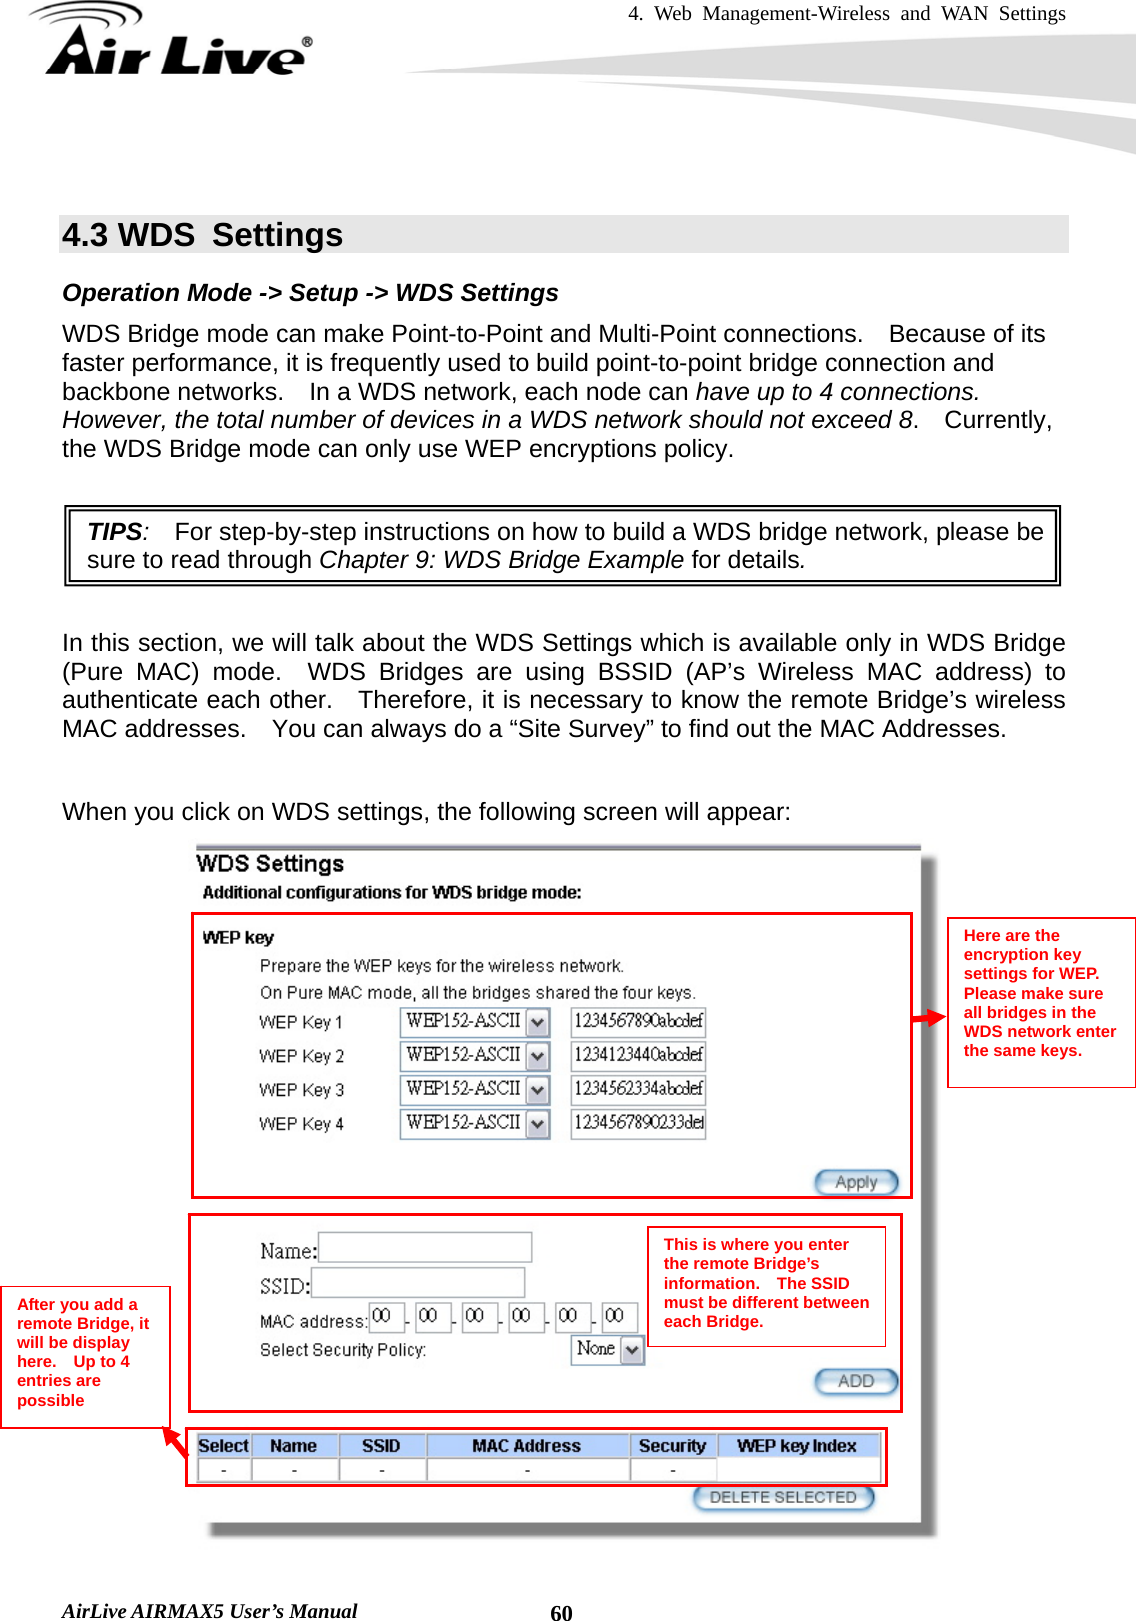 4. Web Management-Wireless and WAN Settings   AirLive AIRMAX5 User’s Manual  60 4.3 WDS  Settings Operation Mode -&gt; Setup -&gt; WDS Settings WDS Bridge mode can make Point-to-Point and Multi-Point connections.    Because of its faster performance, it is frequently used to build point-to-point bridge connection and backbone networks.    In a WDS network, each node can have up to 4 connections.   However, the total number of devices in a WDS network should not exceed 8.  Currently, the WDS Bridge mode can only use WEP encryptions policy.  TIPS:  For step-by-step instructions on how to build a WDS bridge network, please be sure to read through Chapter 9: WDS Bridge Example for details.  In this section, we will talk about the WDS Settings which is available only in WDS Bridge (Pure MAC) mode.  WDS Bridges are using BSSID (AP’s Wireless MAC address) to authenticate each other.    Therefore, it is necessary to know the remote Bridge’s wireless MAC addresses.    You can always do a “Site Survey” to find out the MAC Addresses.  When you click on WDS settings, the following screen will appear:  Here are the encryption key settings for WEP.   Please make sure all bridges in the WDS network enter the same keys. This is where you enter the remote Bridge’s information.  The SSID must be different between each Bridge. After you add a remote Bridge, it will be display here.  Up to 4 entries are possible 